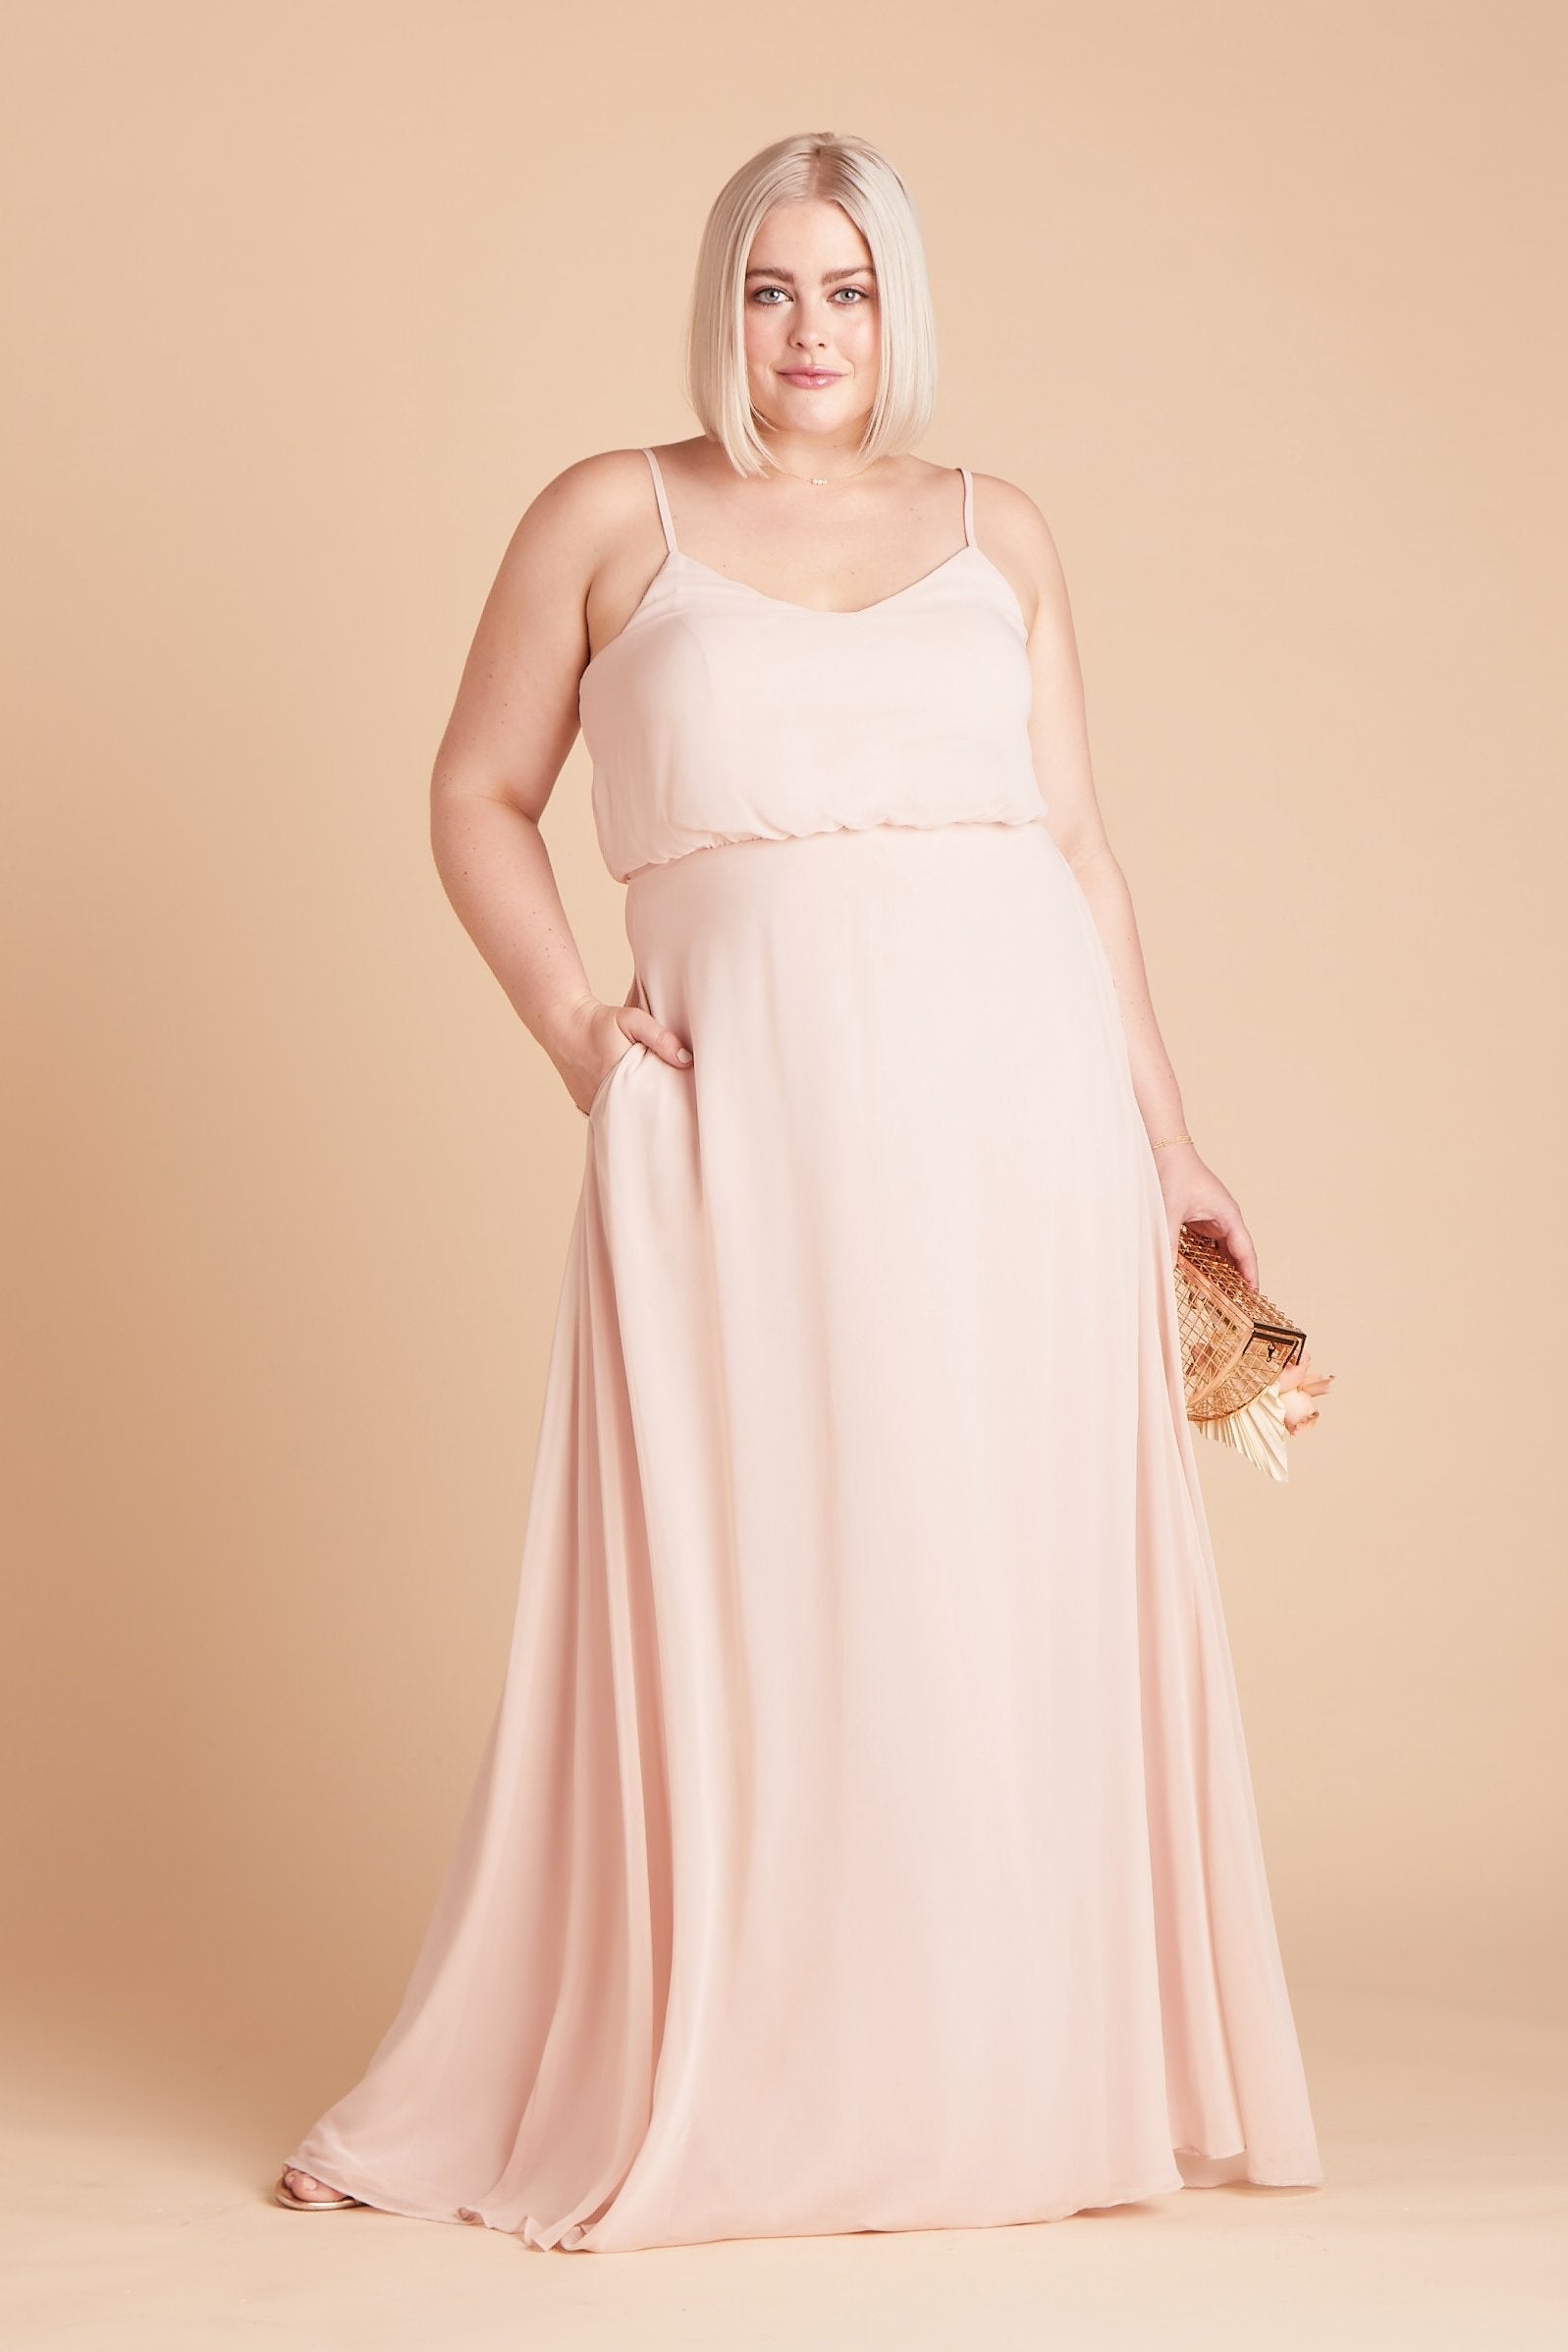 Gwennie plus size bridesmaid dress in pale blush chiffon by Birdy Grey, front view with hand in pocket